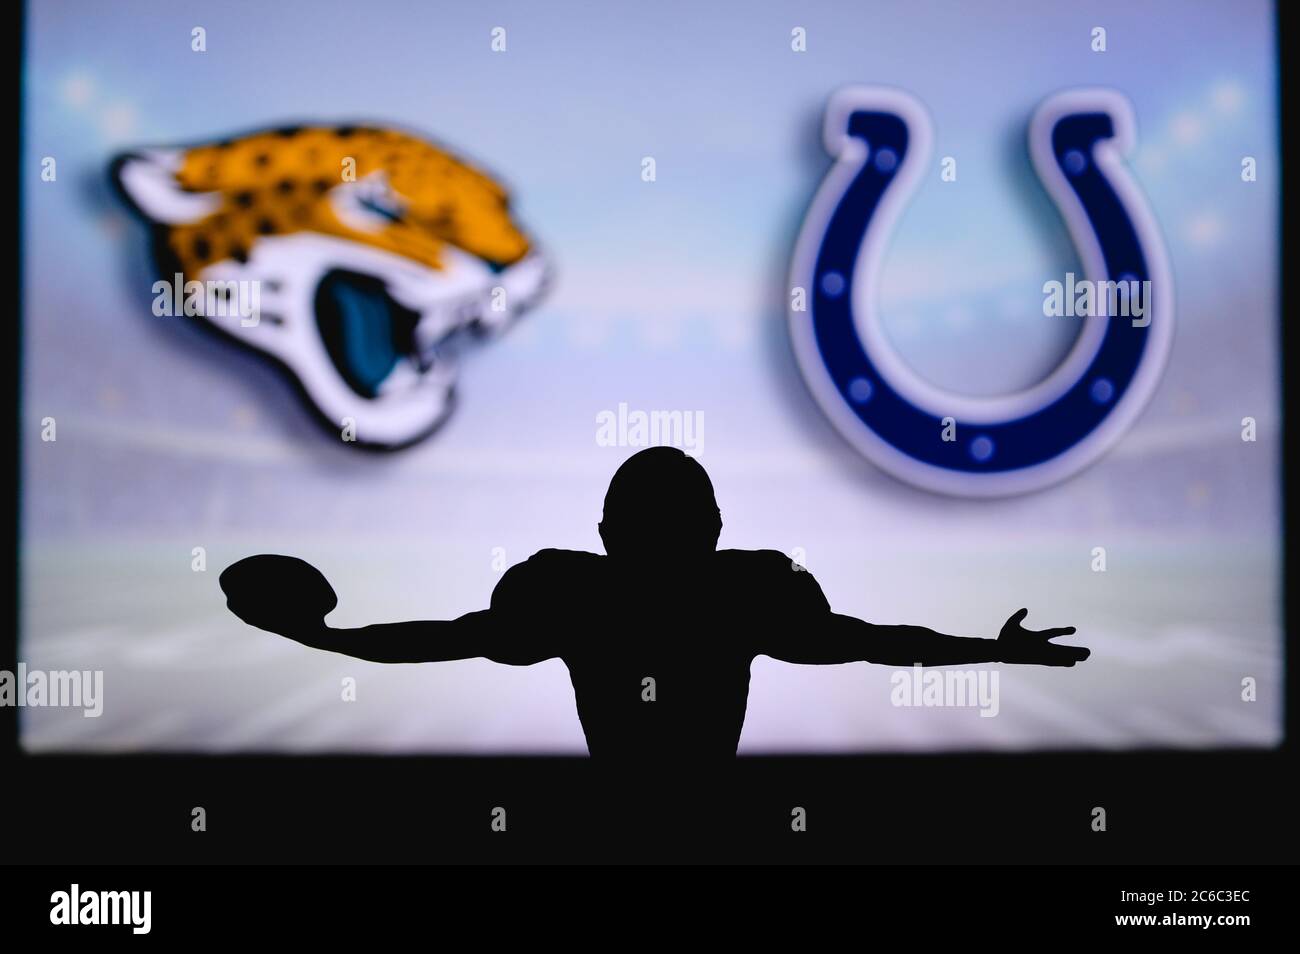 Jacksonville Jaguars vs. Indianapolis Colts. NFL Game. American Football League match. Silhouette of professional player celebrate touch down. Screen Stock Photo